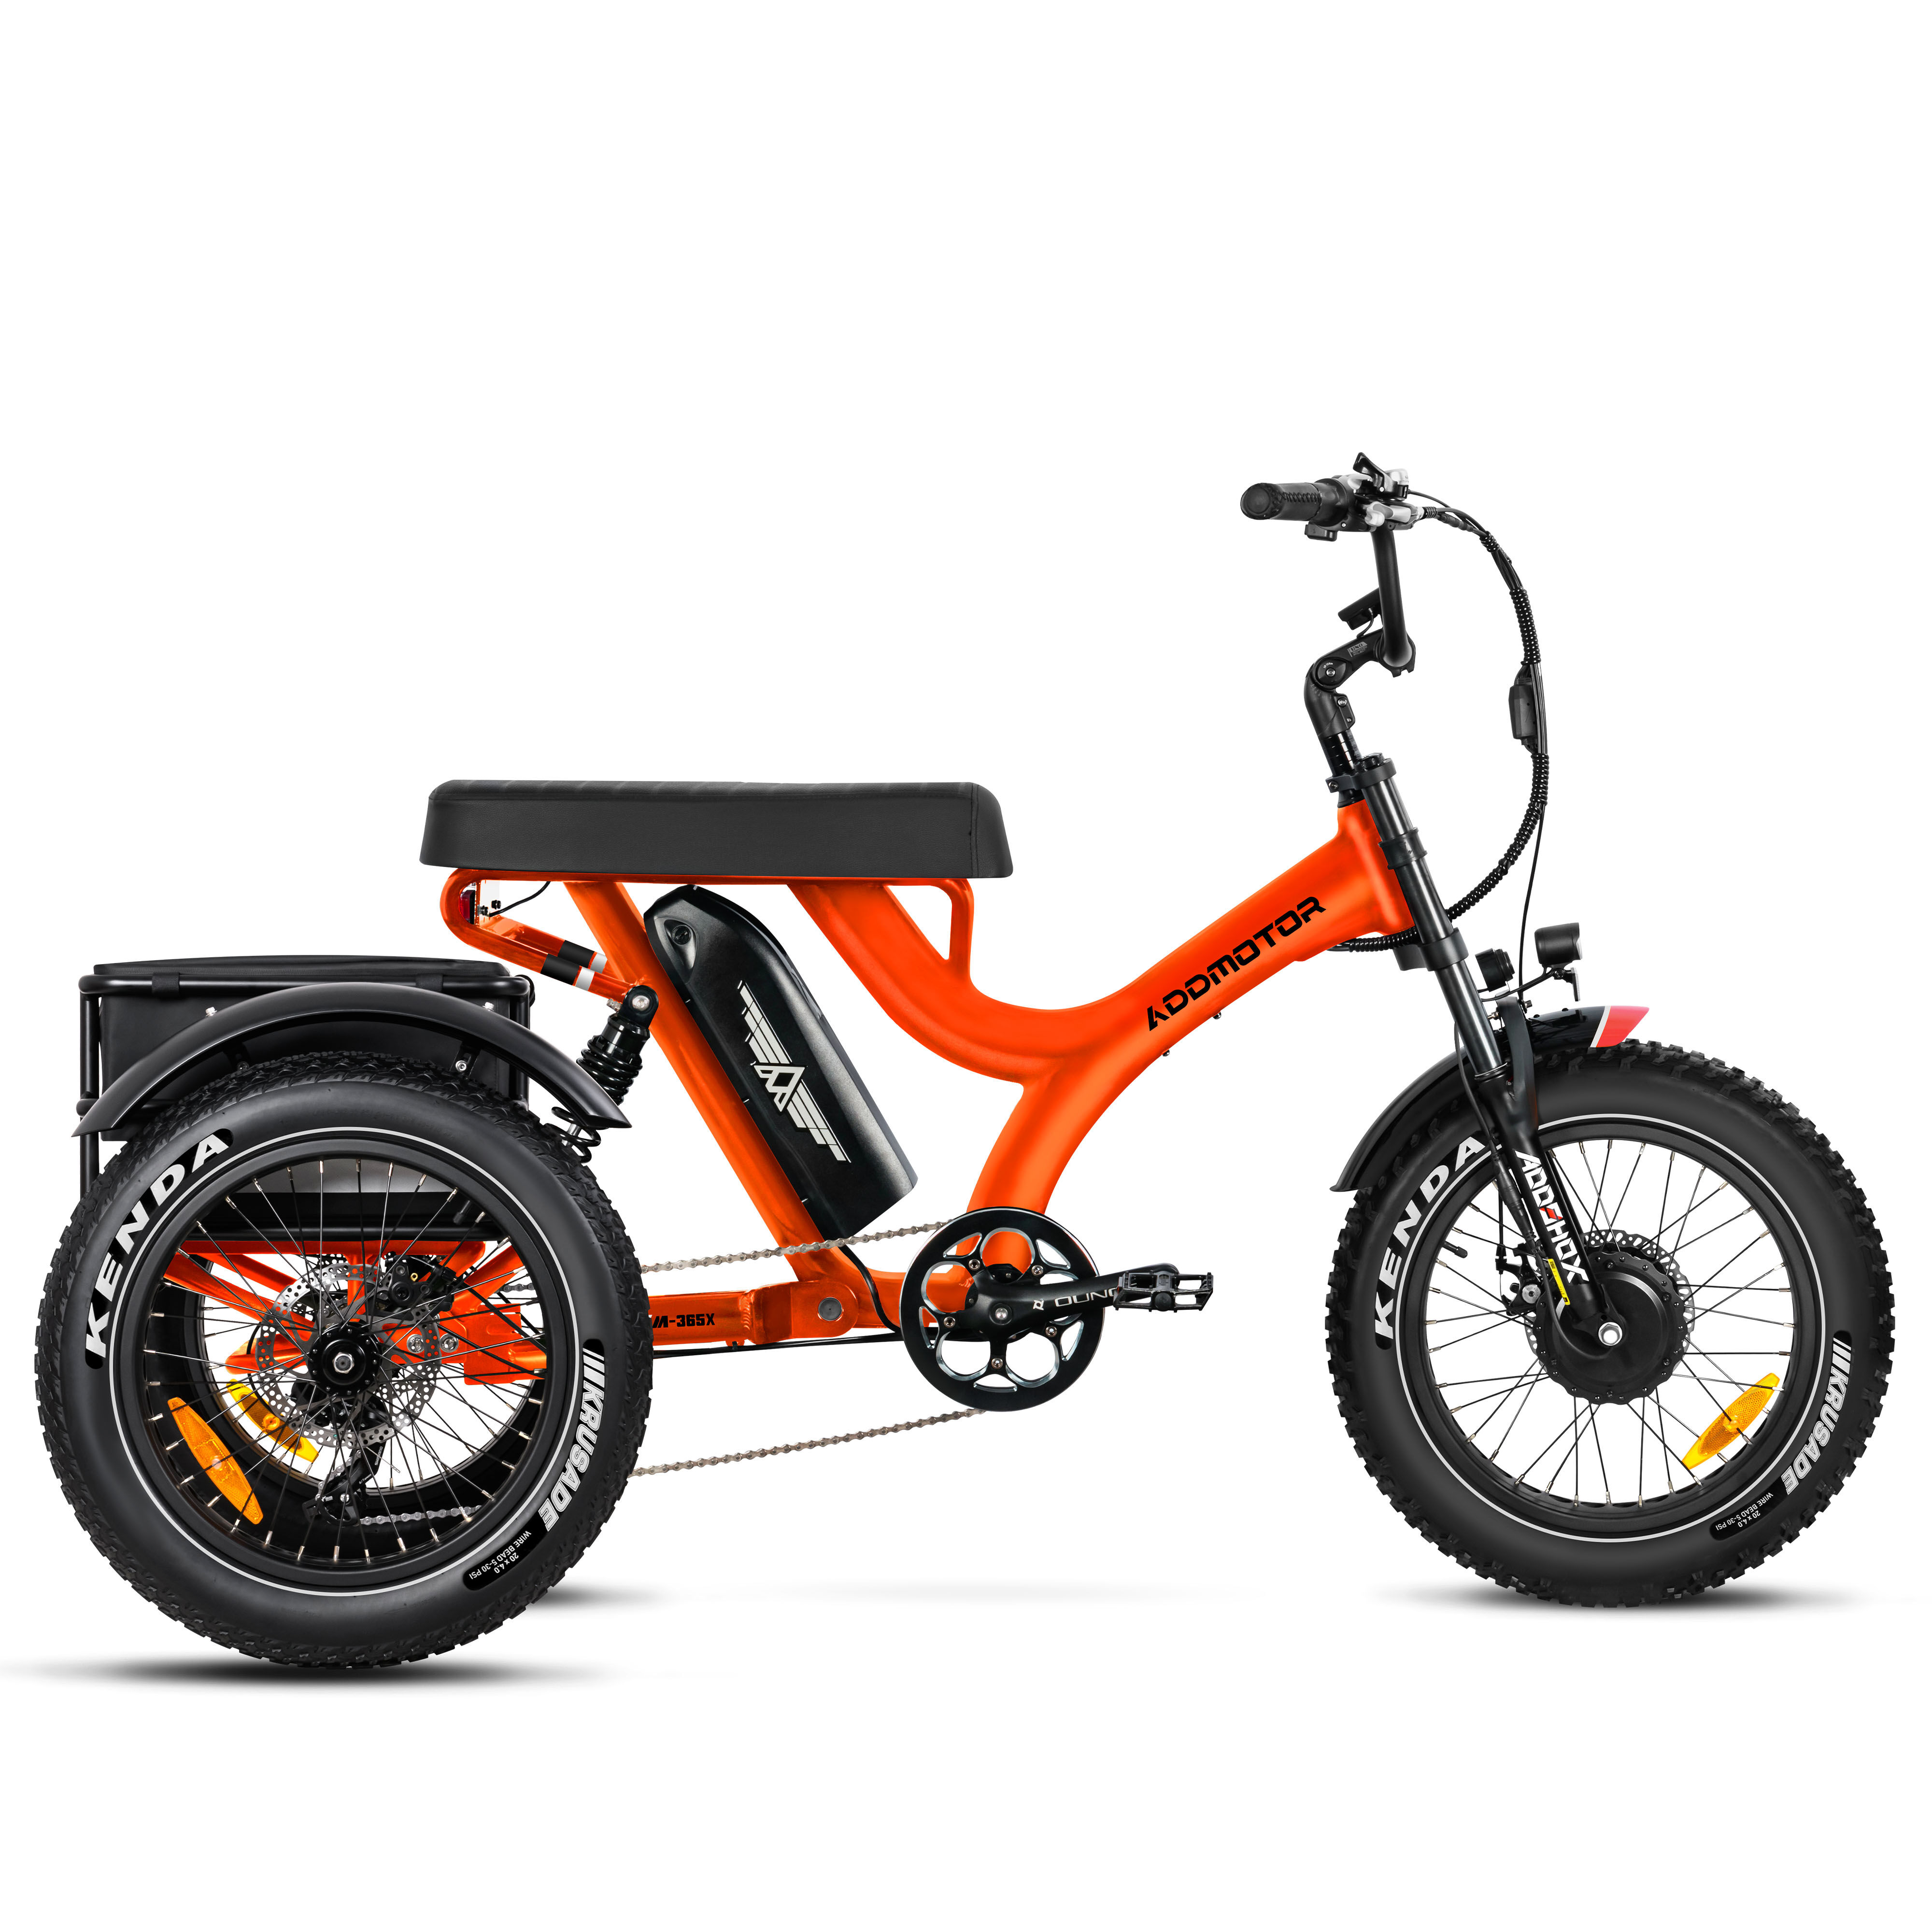 Addmotor Herotri M-365X Electric Trike for Adult with 48V*20AH Battery - Fat Tire 3 Wheel Etrike with Banana Seat - Orange